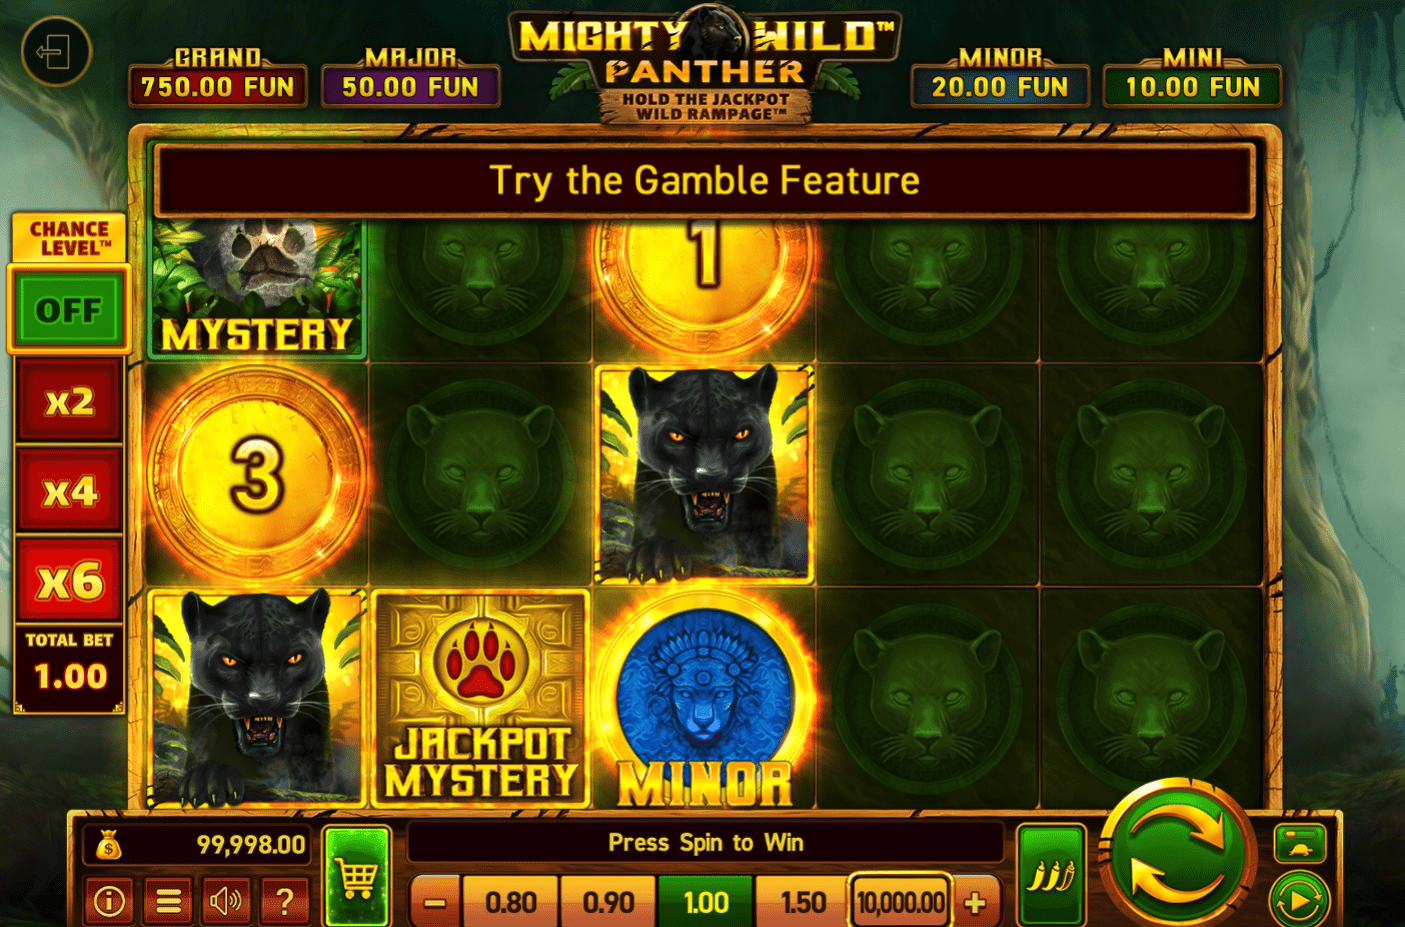 Mighty Wild Pather hold the jackpot slot reels